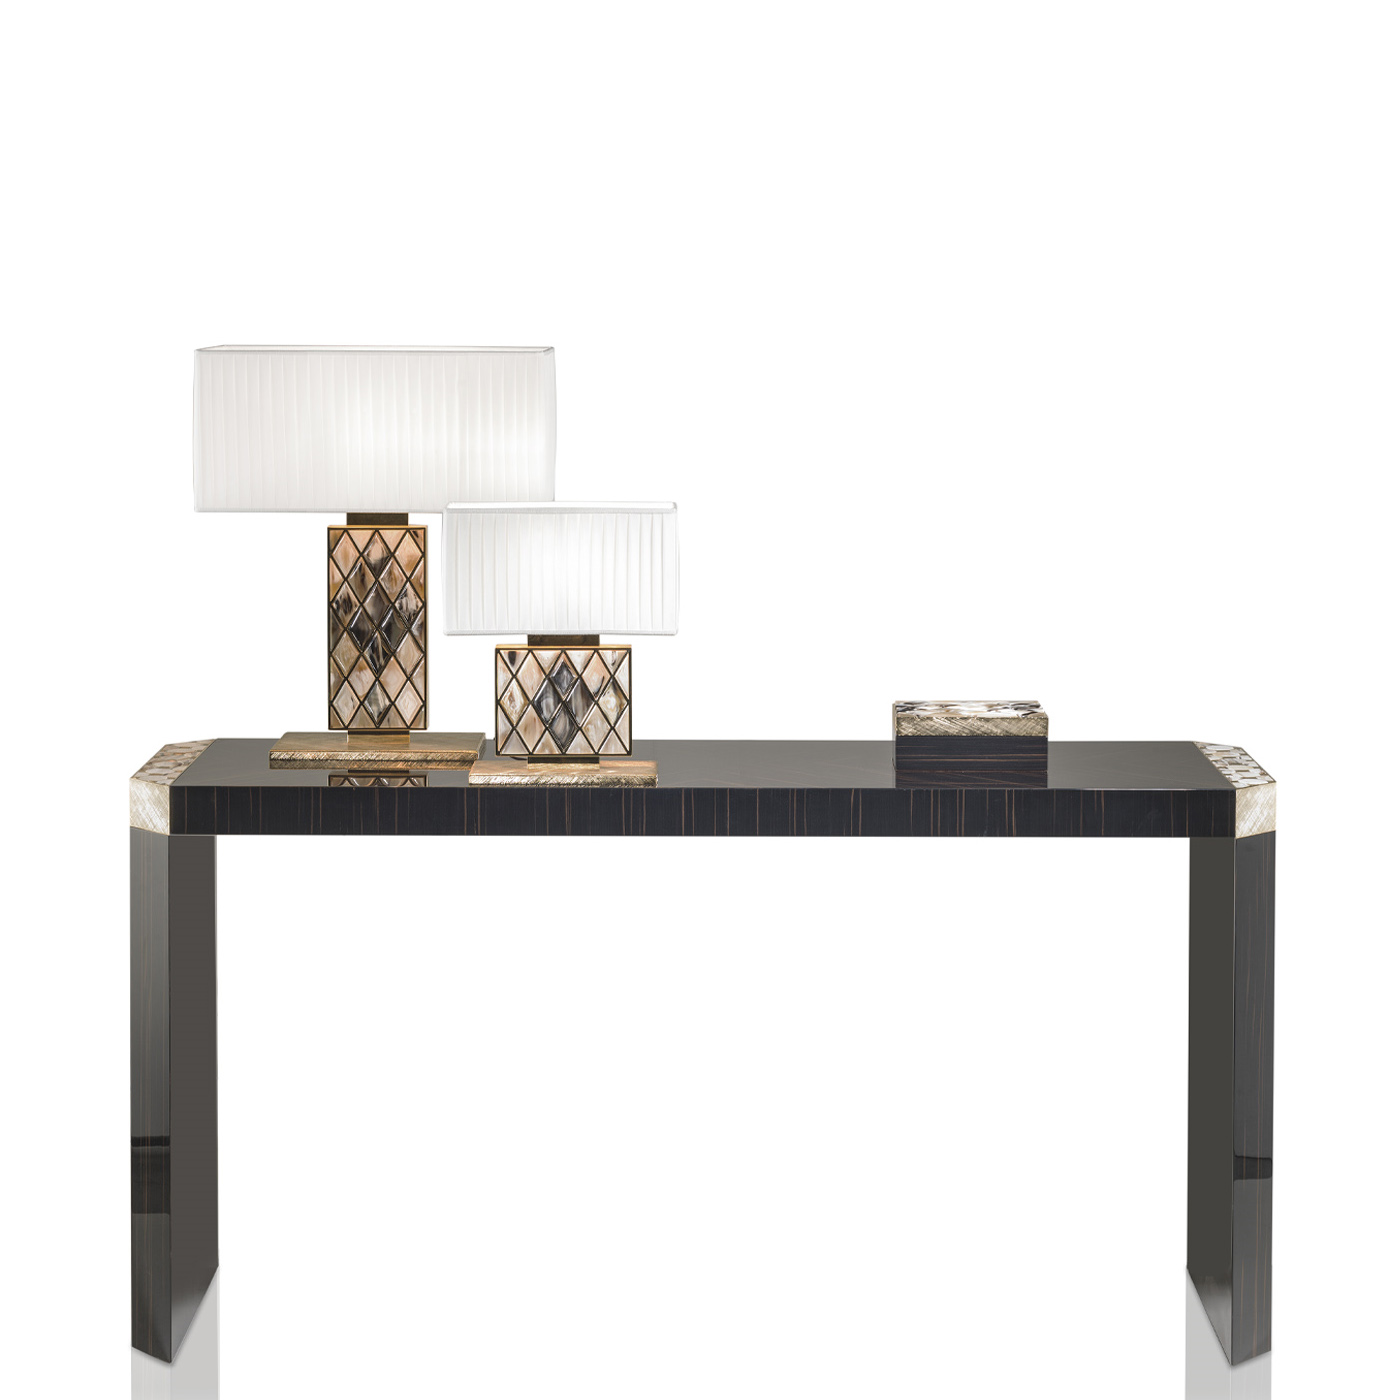 Tables and console tables - Ercolano console table in glossy ebony and horn - ambiance picture - Arcahorn